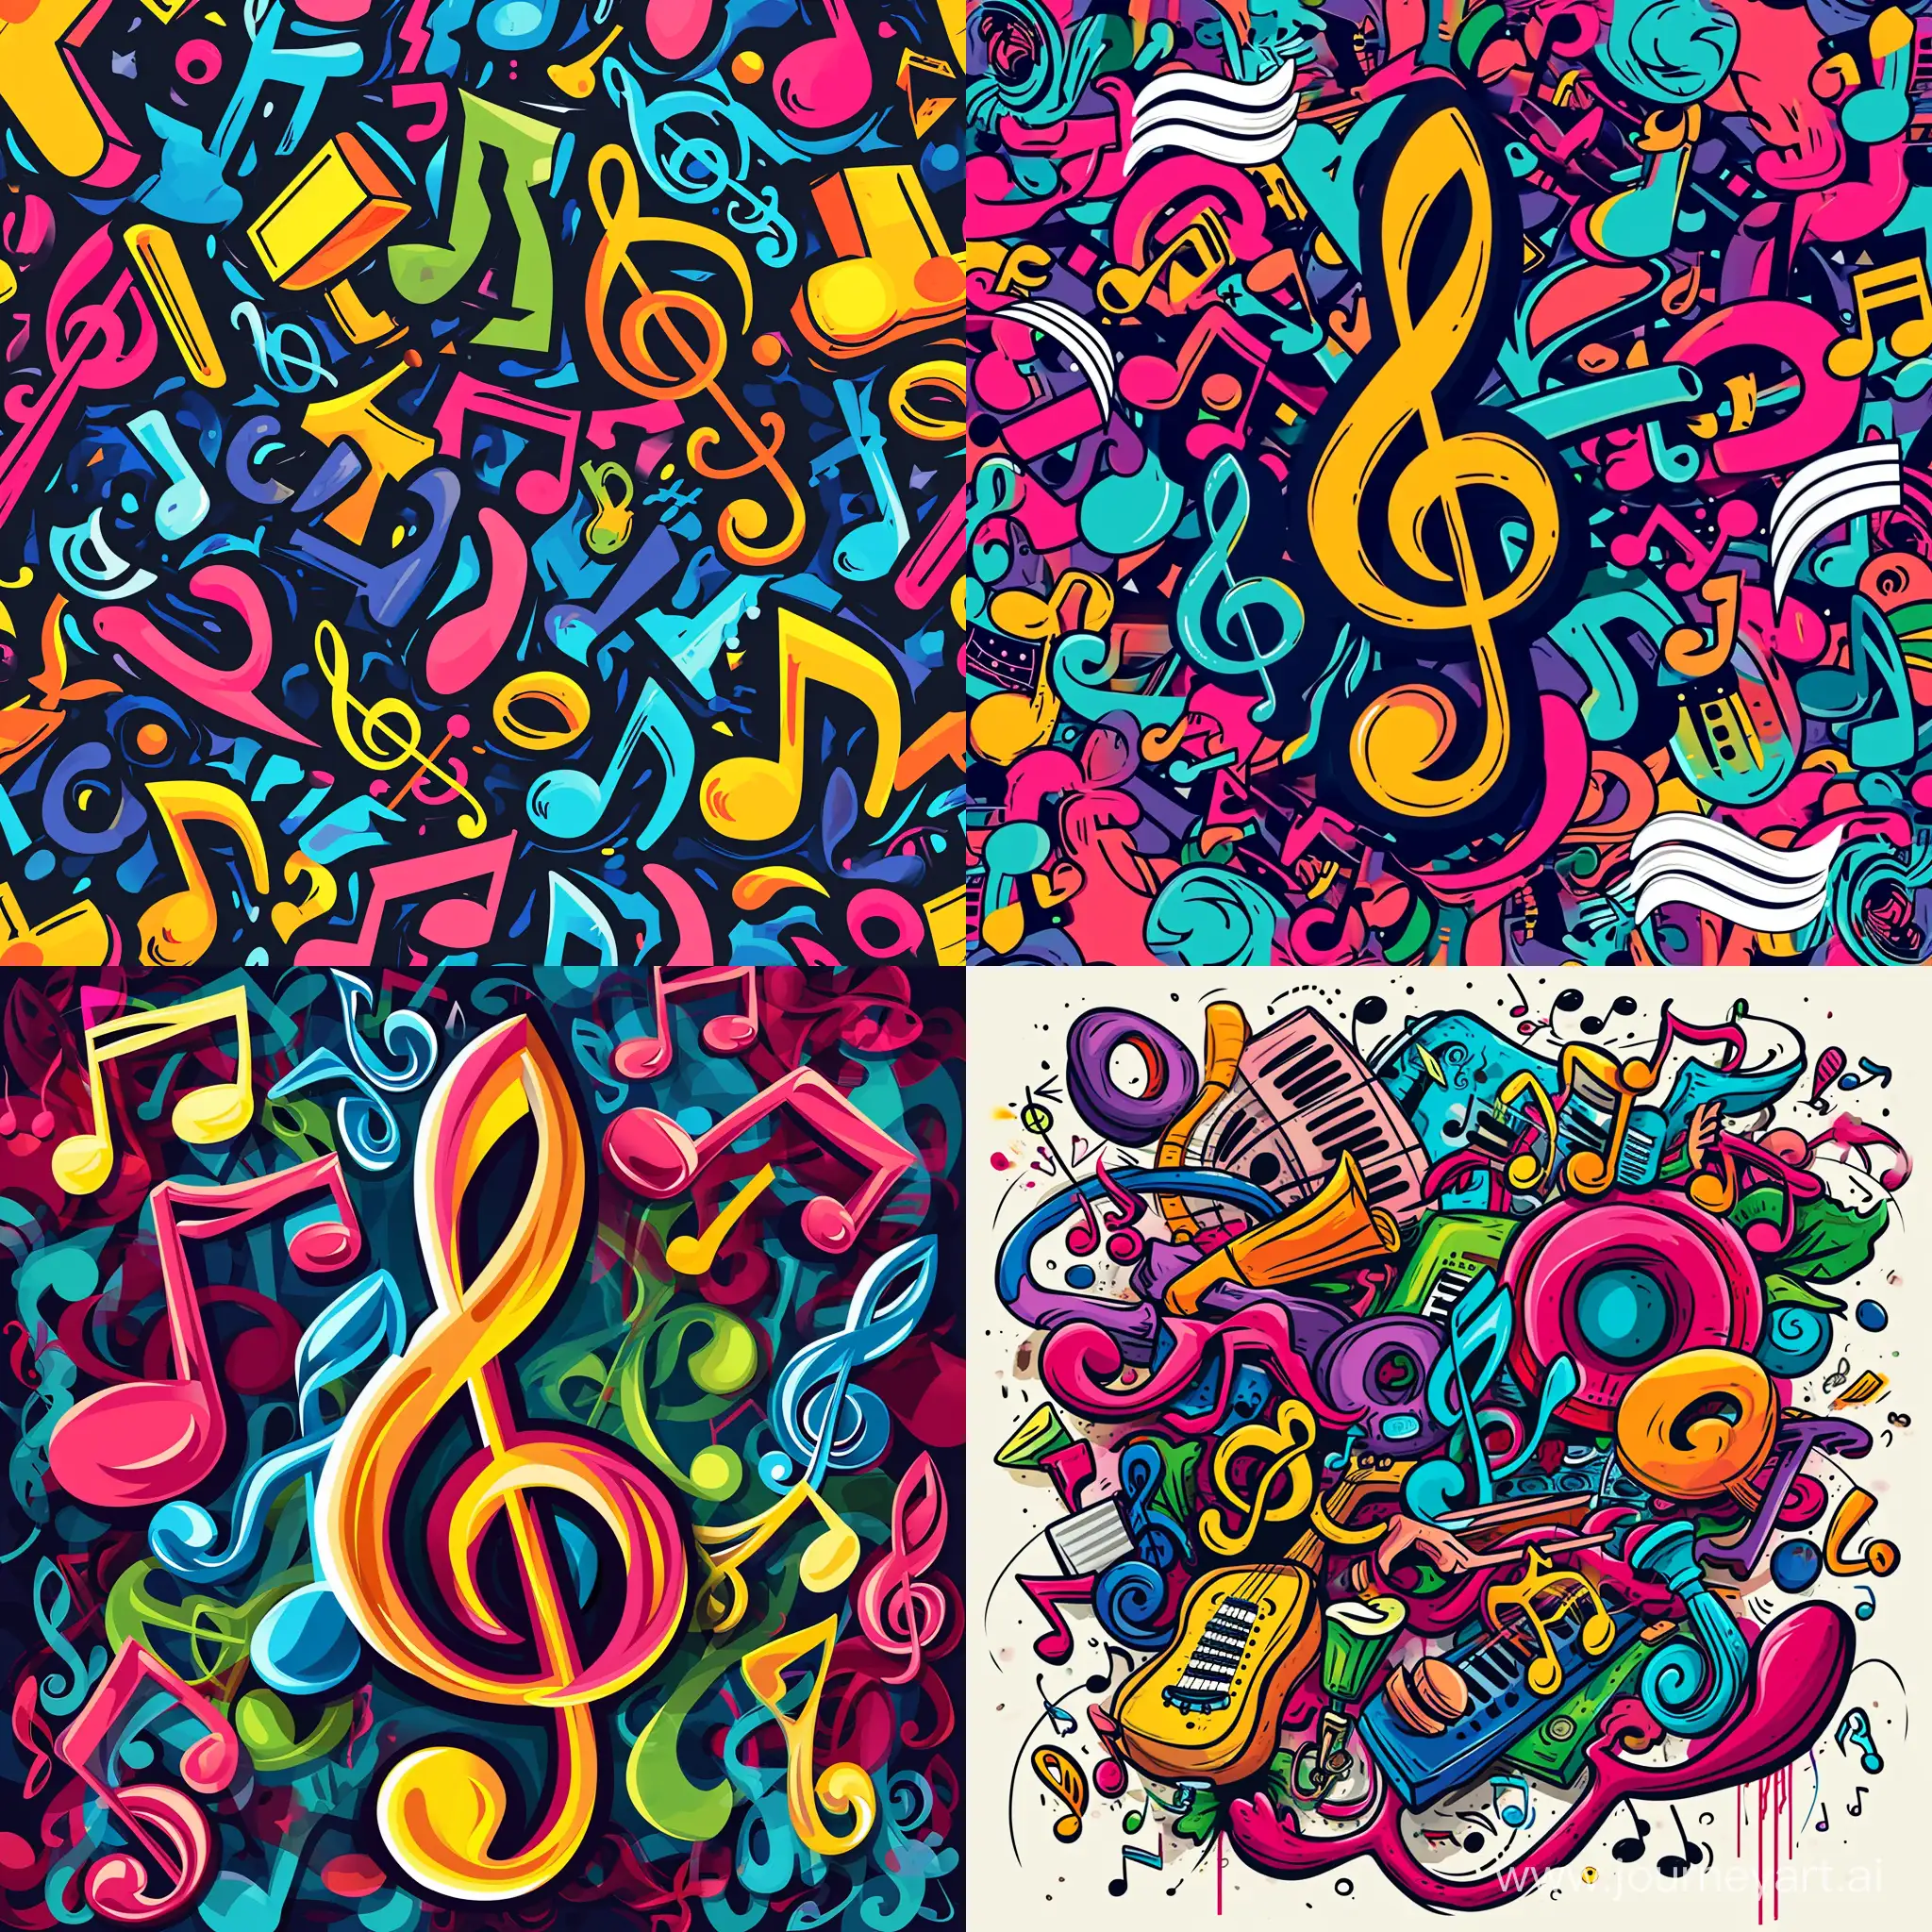 background of musical symbols, complex colors, cartoon style, caricature, pop art style